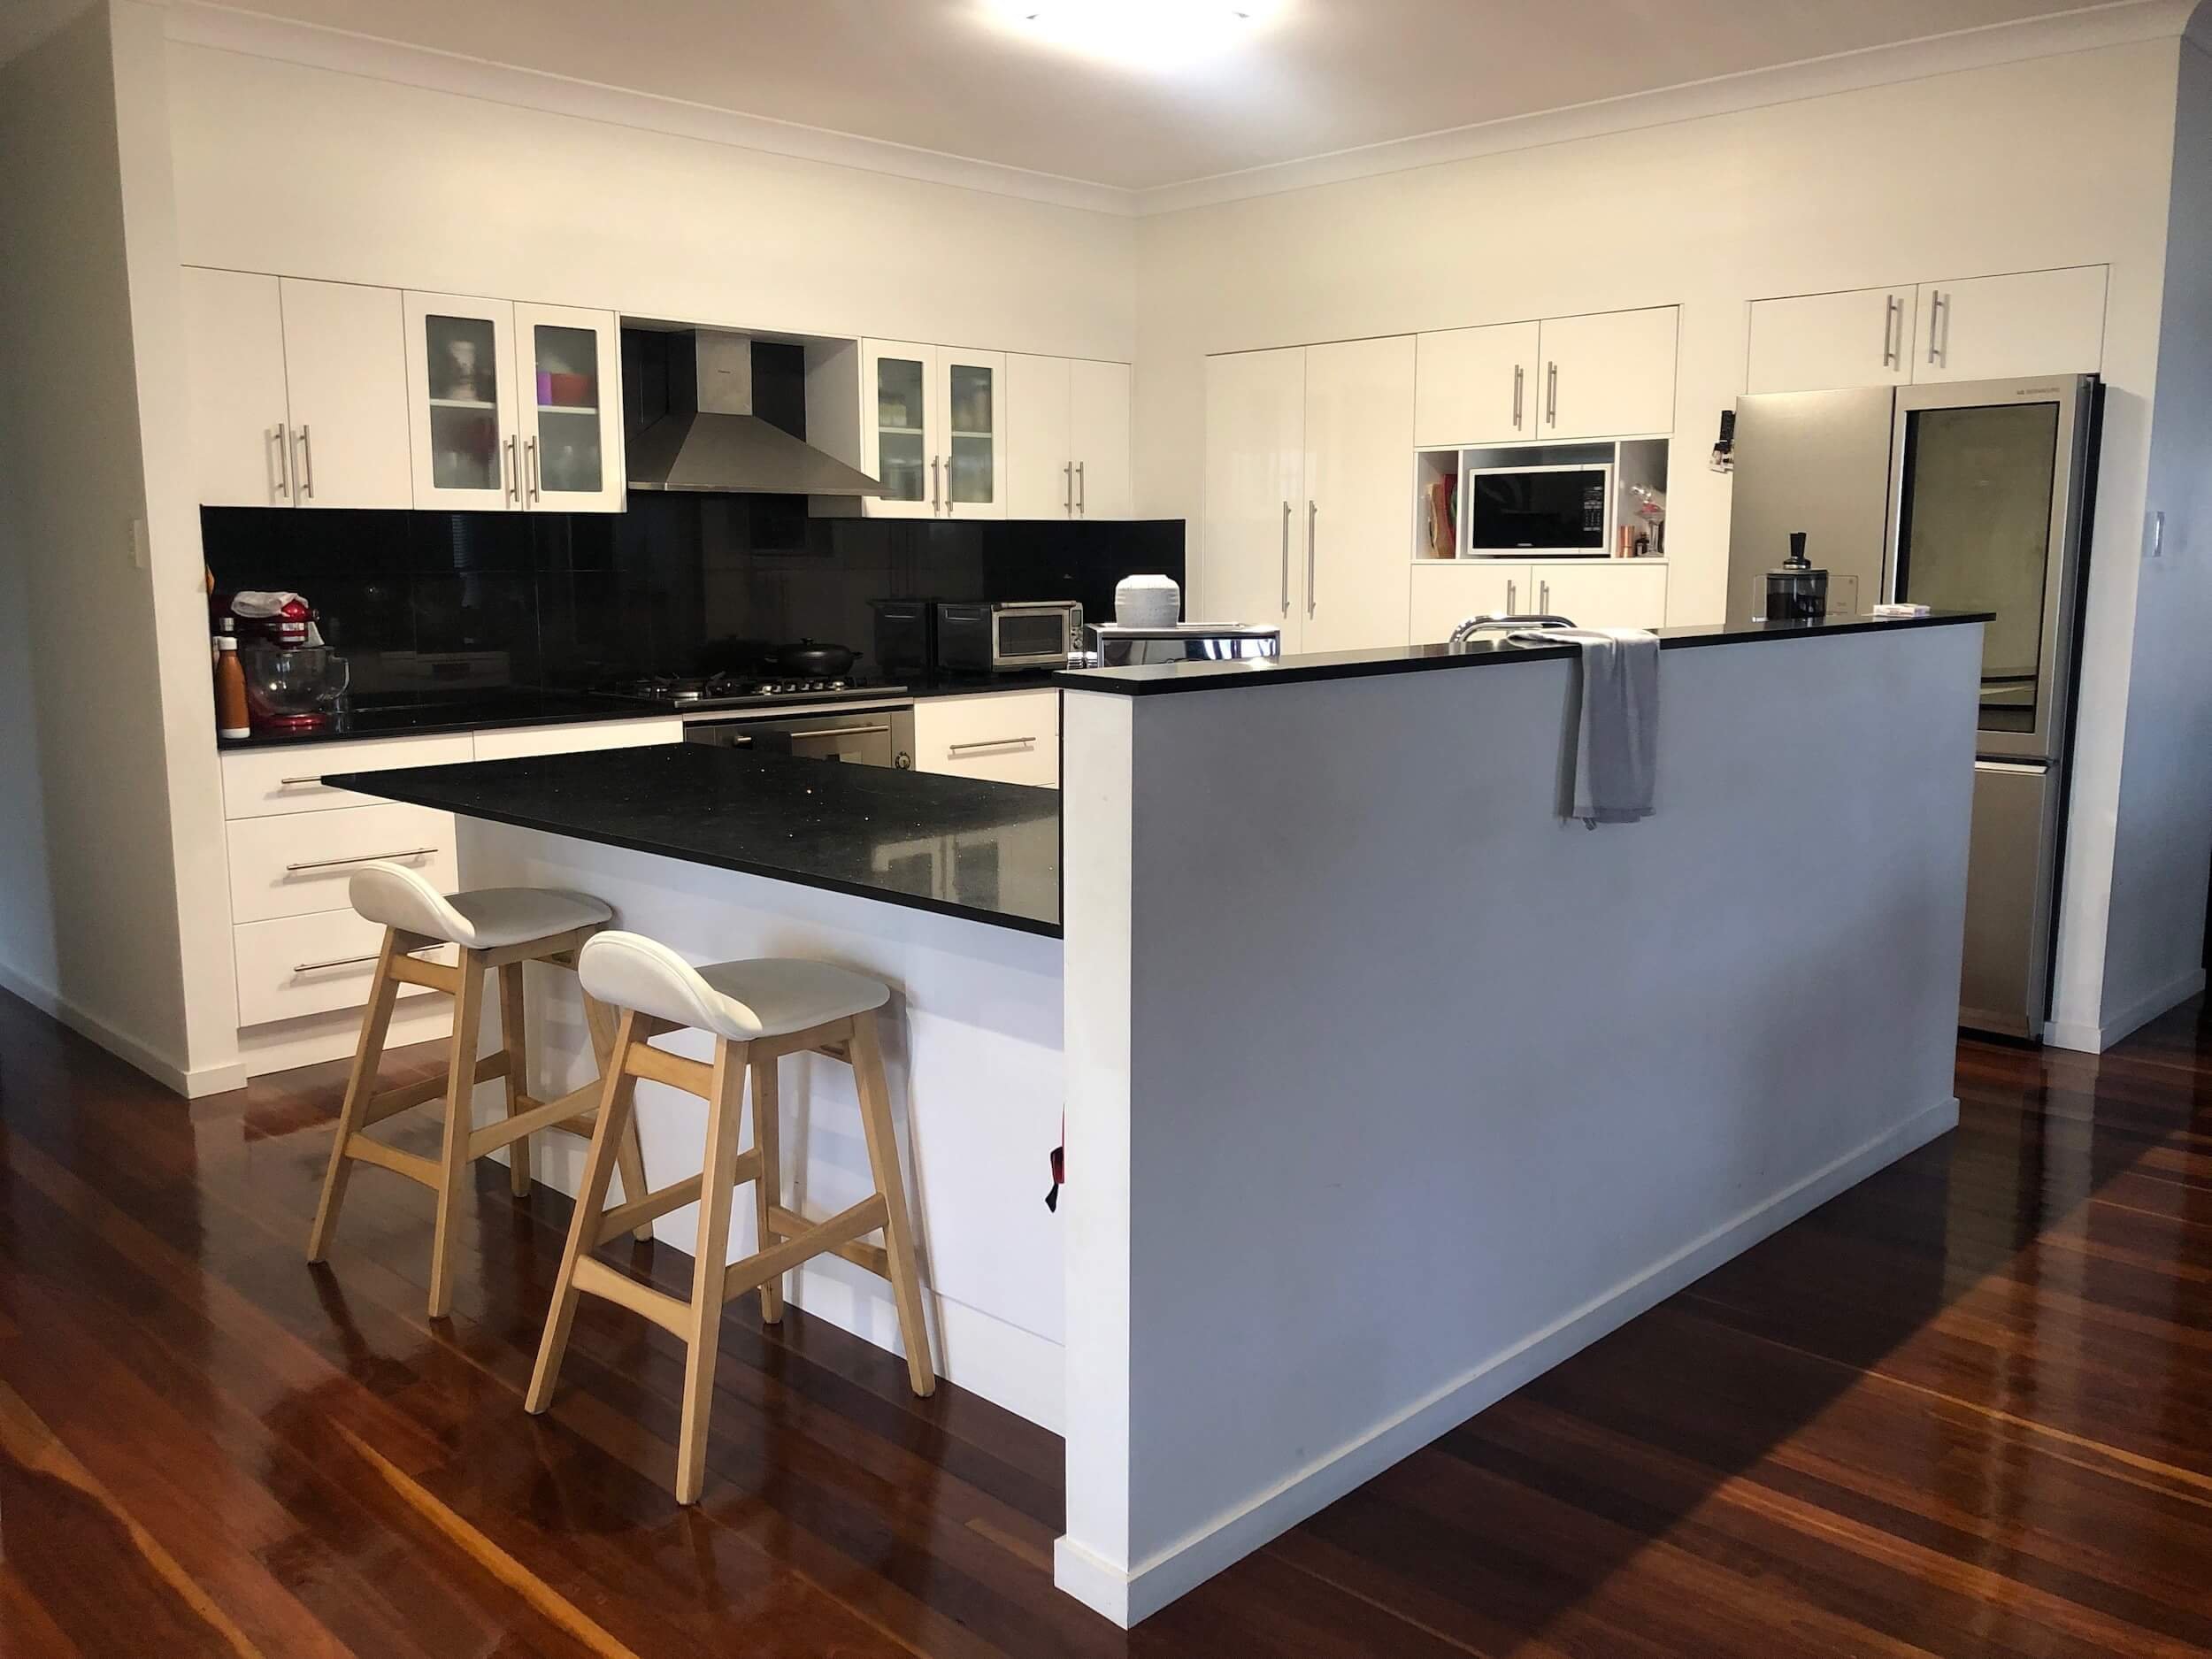 before-gallery-maleny-kitchen-cabinet-makers-sunshine-coast-cabinetry-renovations-awards-flat-packs-cabinet-house.jpeg